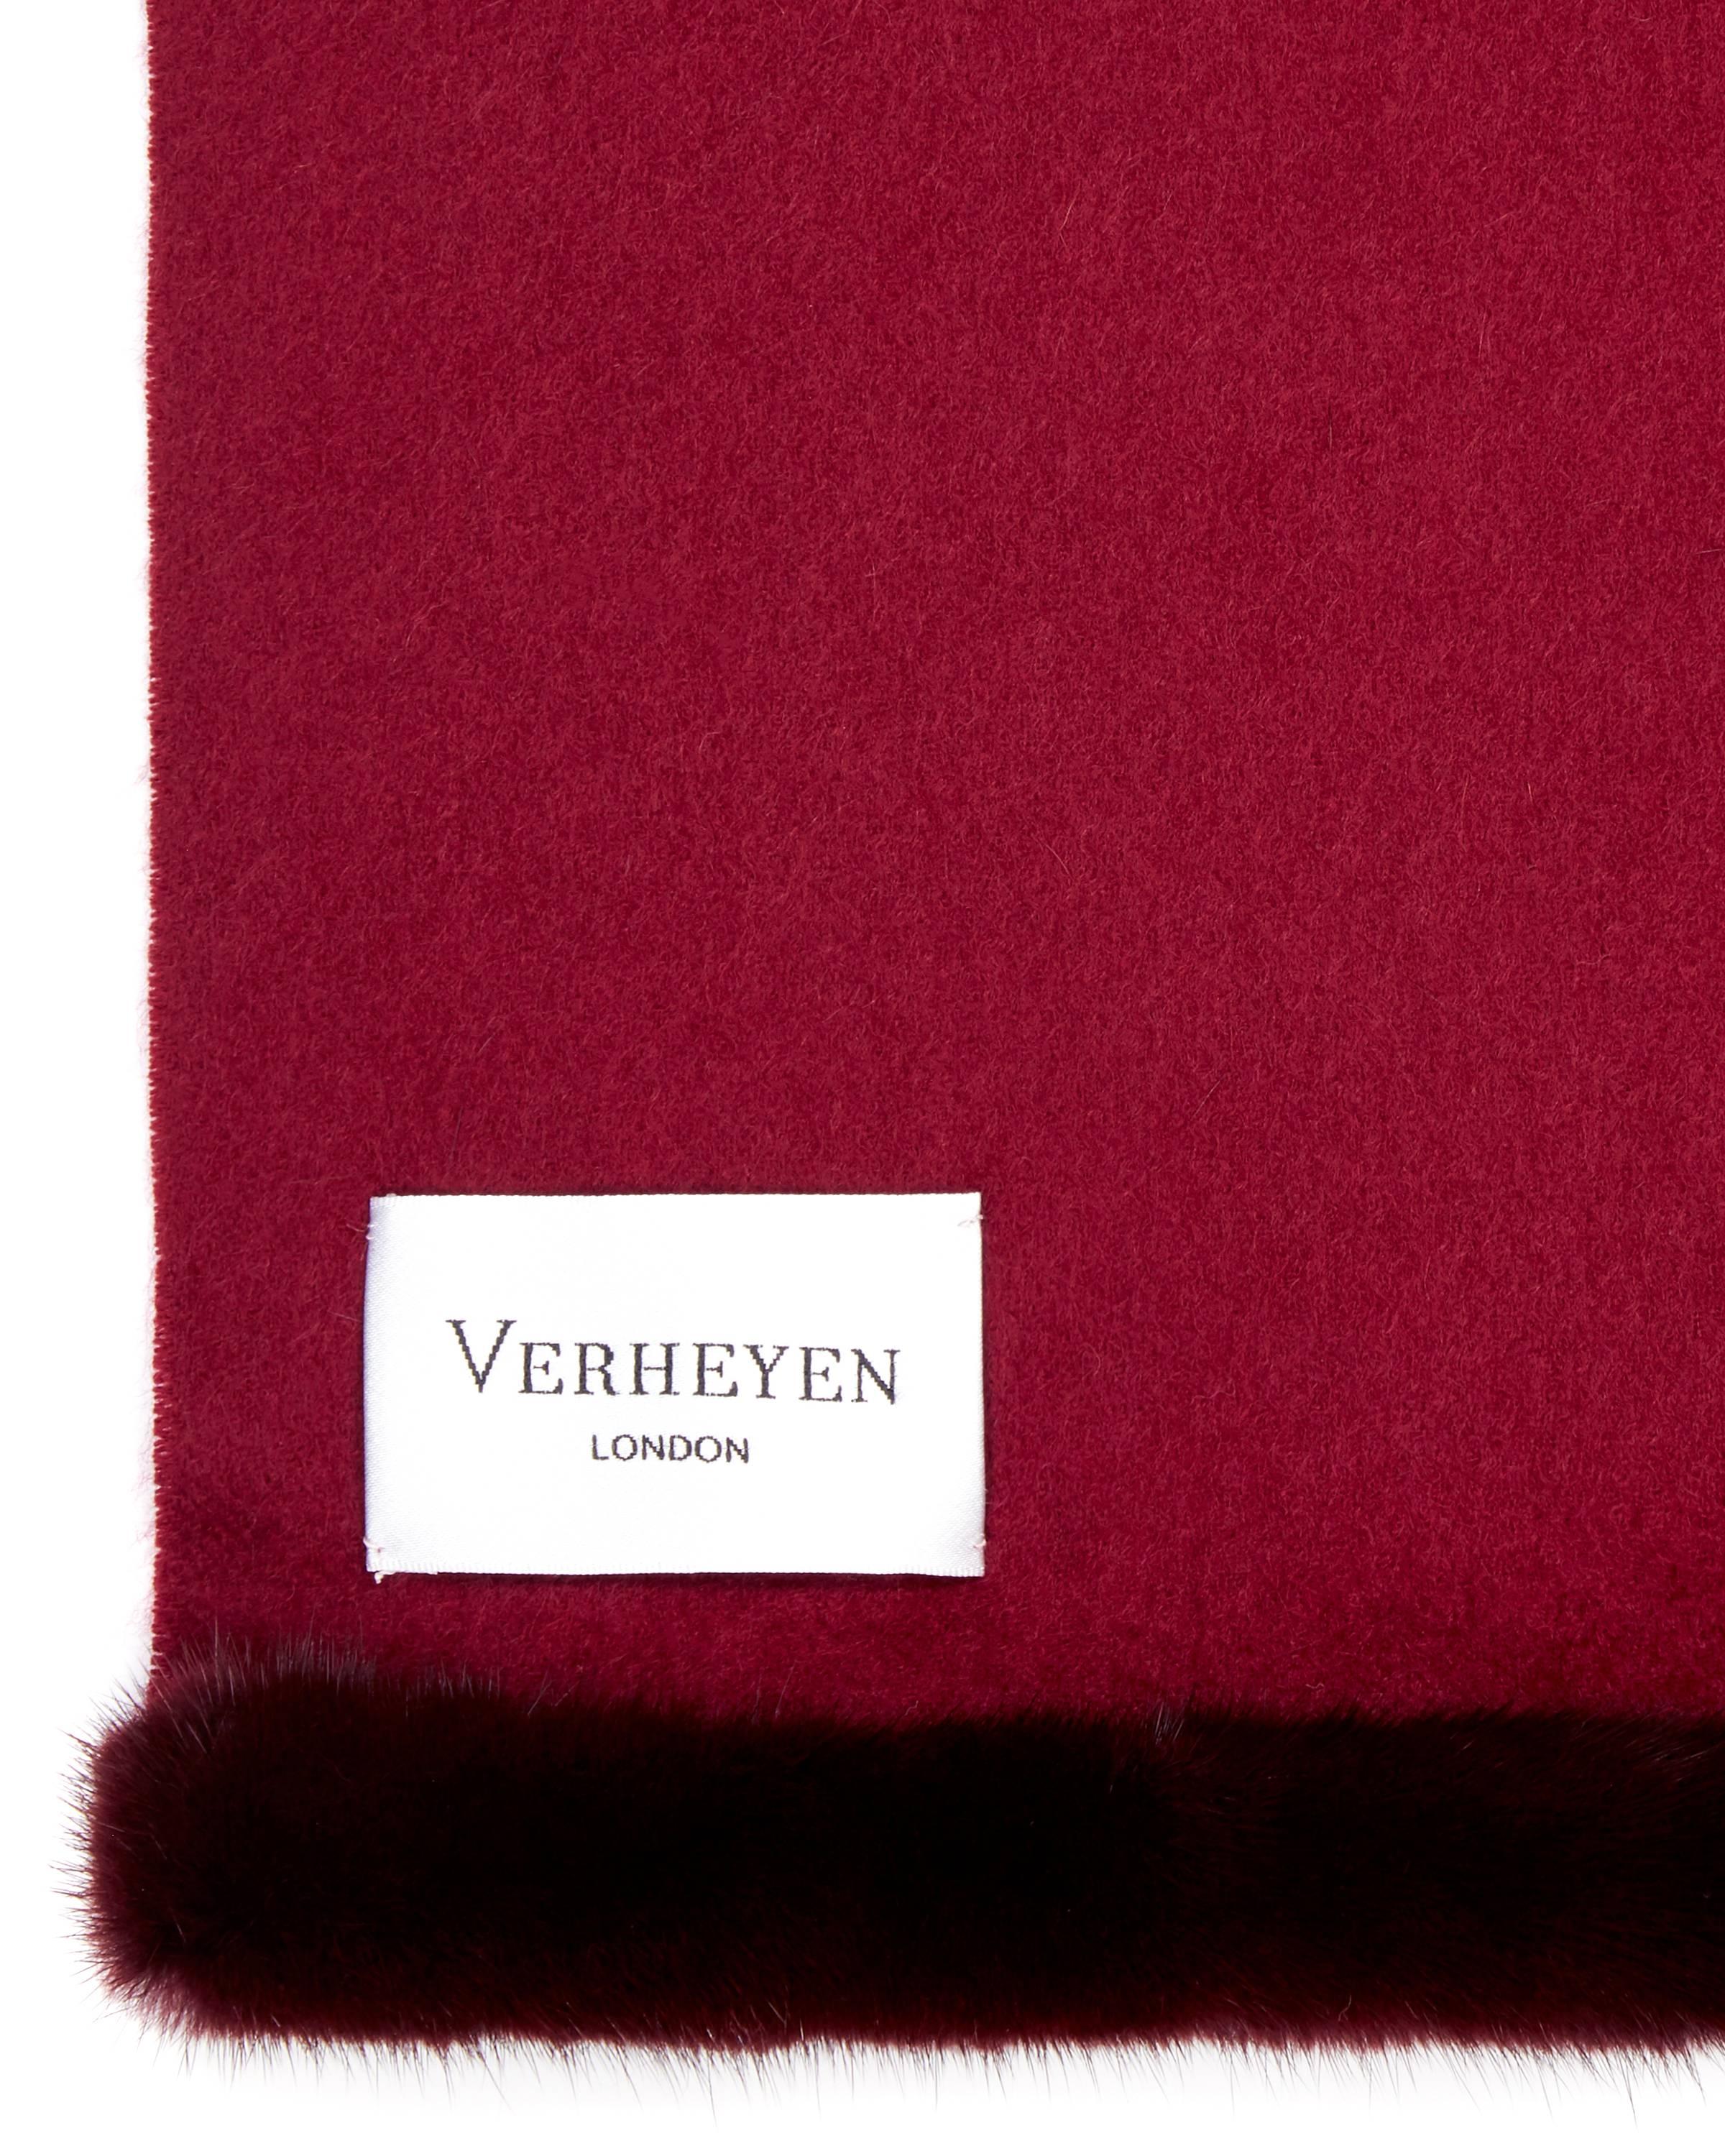 Verheyen London Mink Fur Trimmed Cashmere Scarf in Burgundy 

Verheyen London’s shawl is spun from the finest Scottish woven cashmere and finished with the most exquisite dyed mink. Its warmth envelopes you with luxury, perfect for travel and